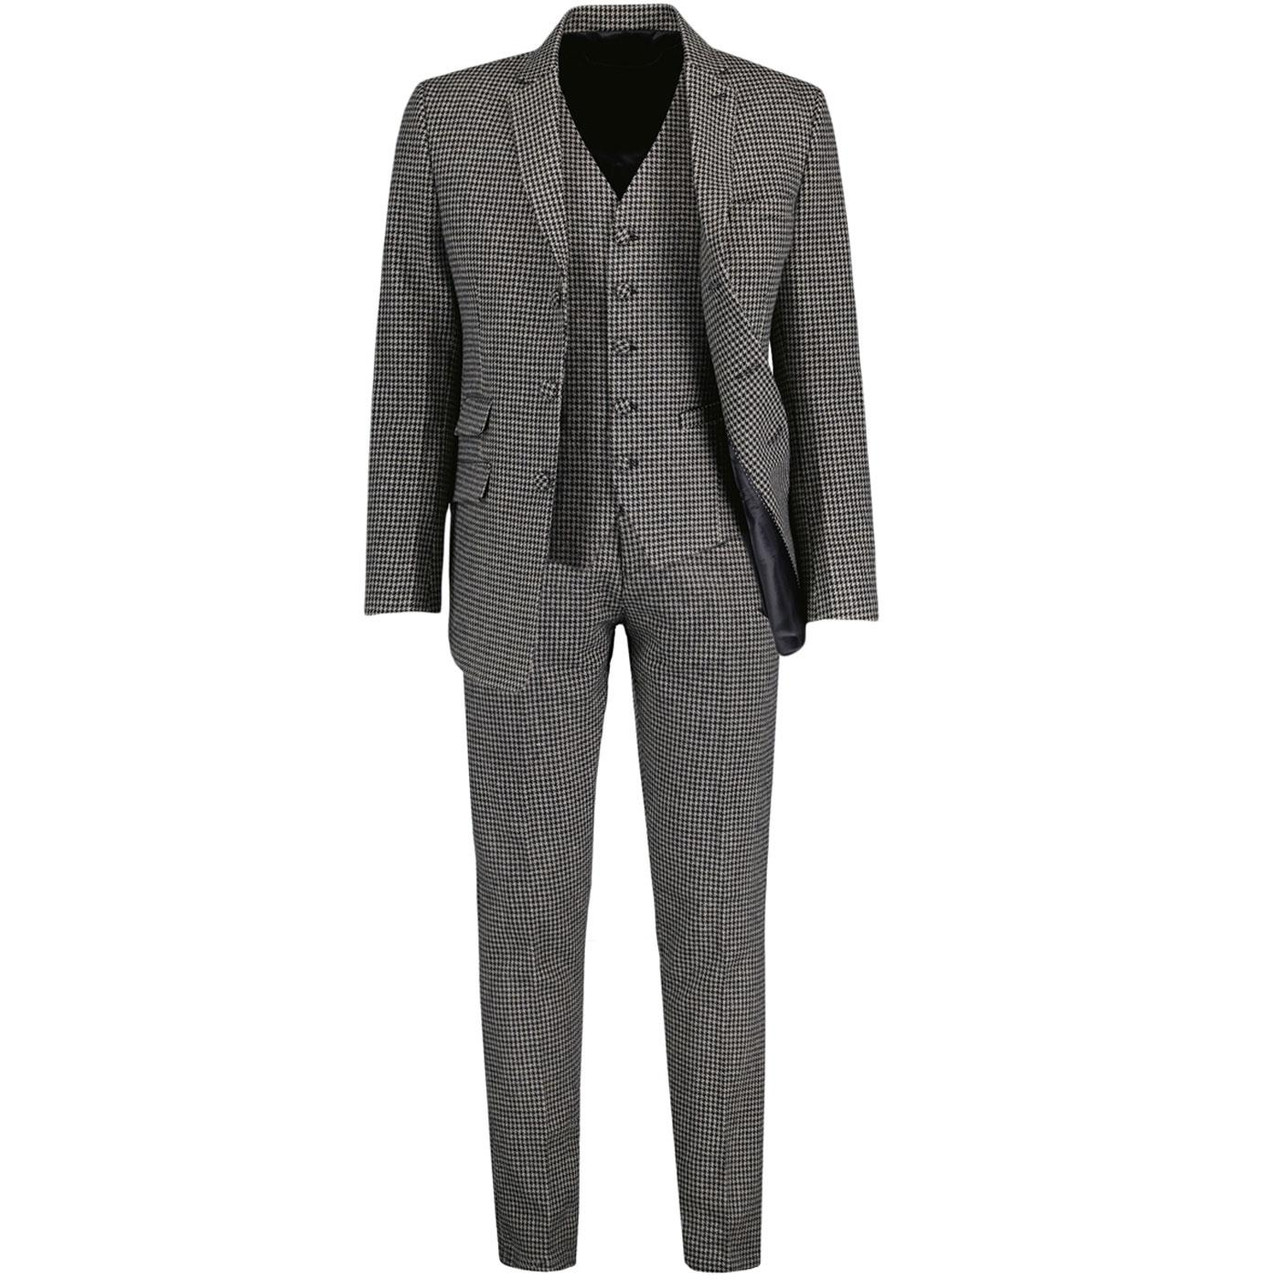 Black vested 3-button solid suits